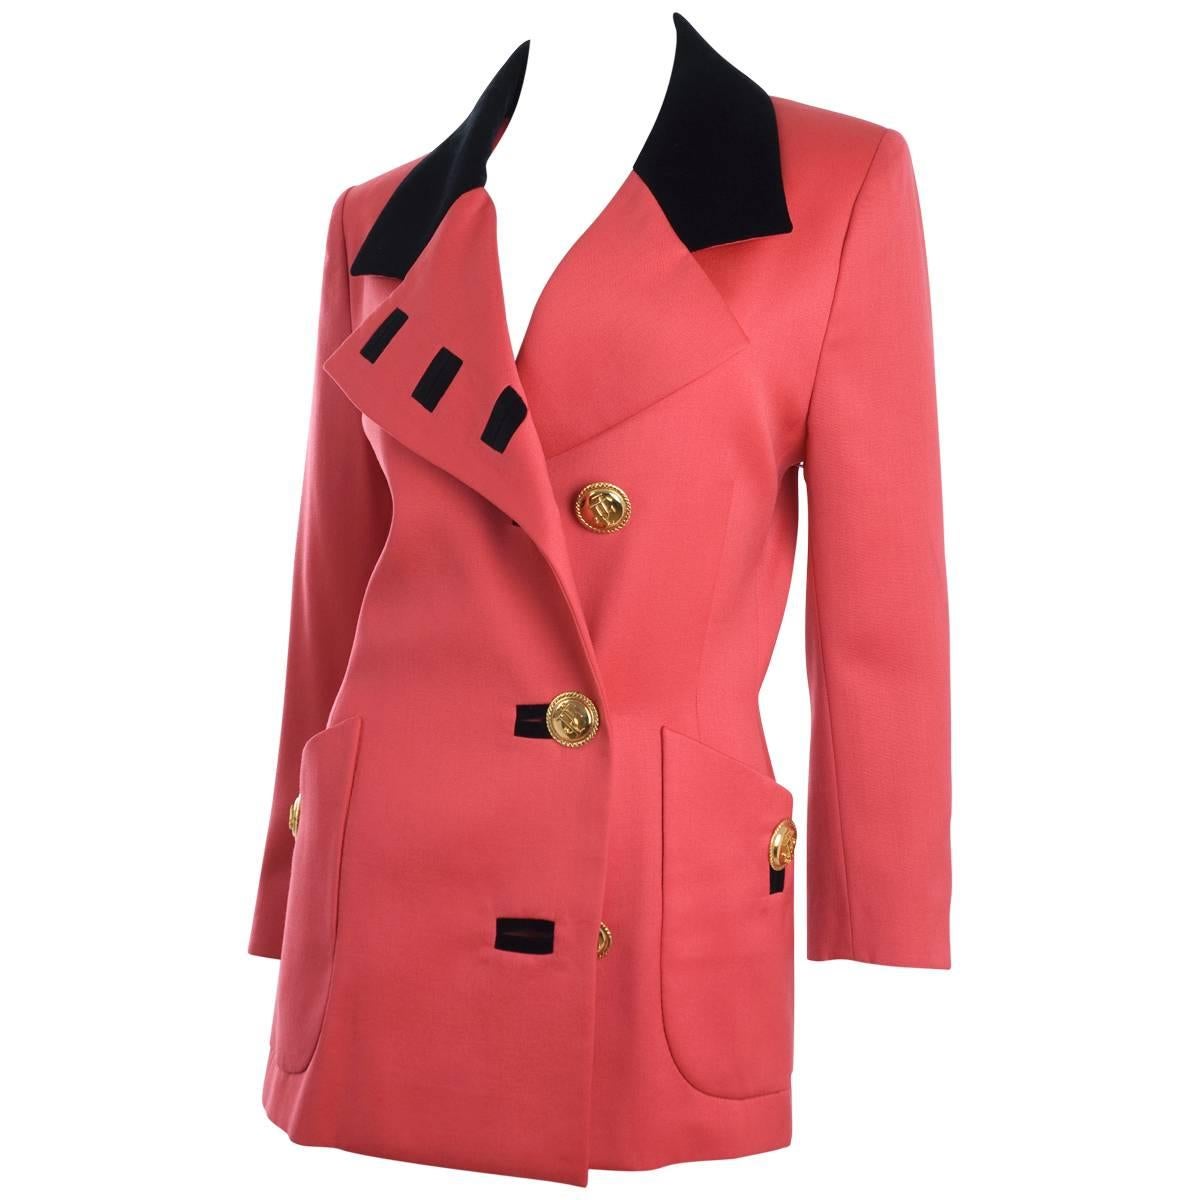 Jaques Fath Jacket in Lipstick Red and Black Velvet For Sale